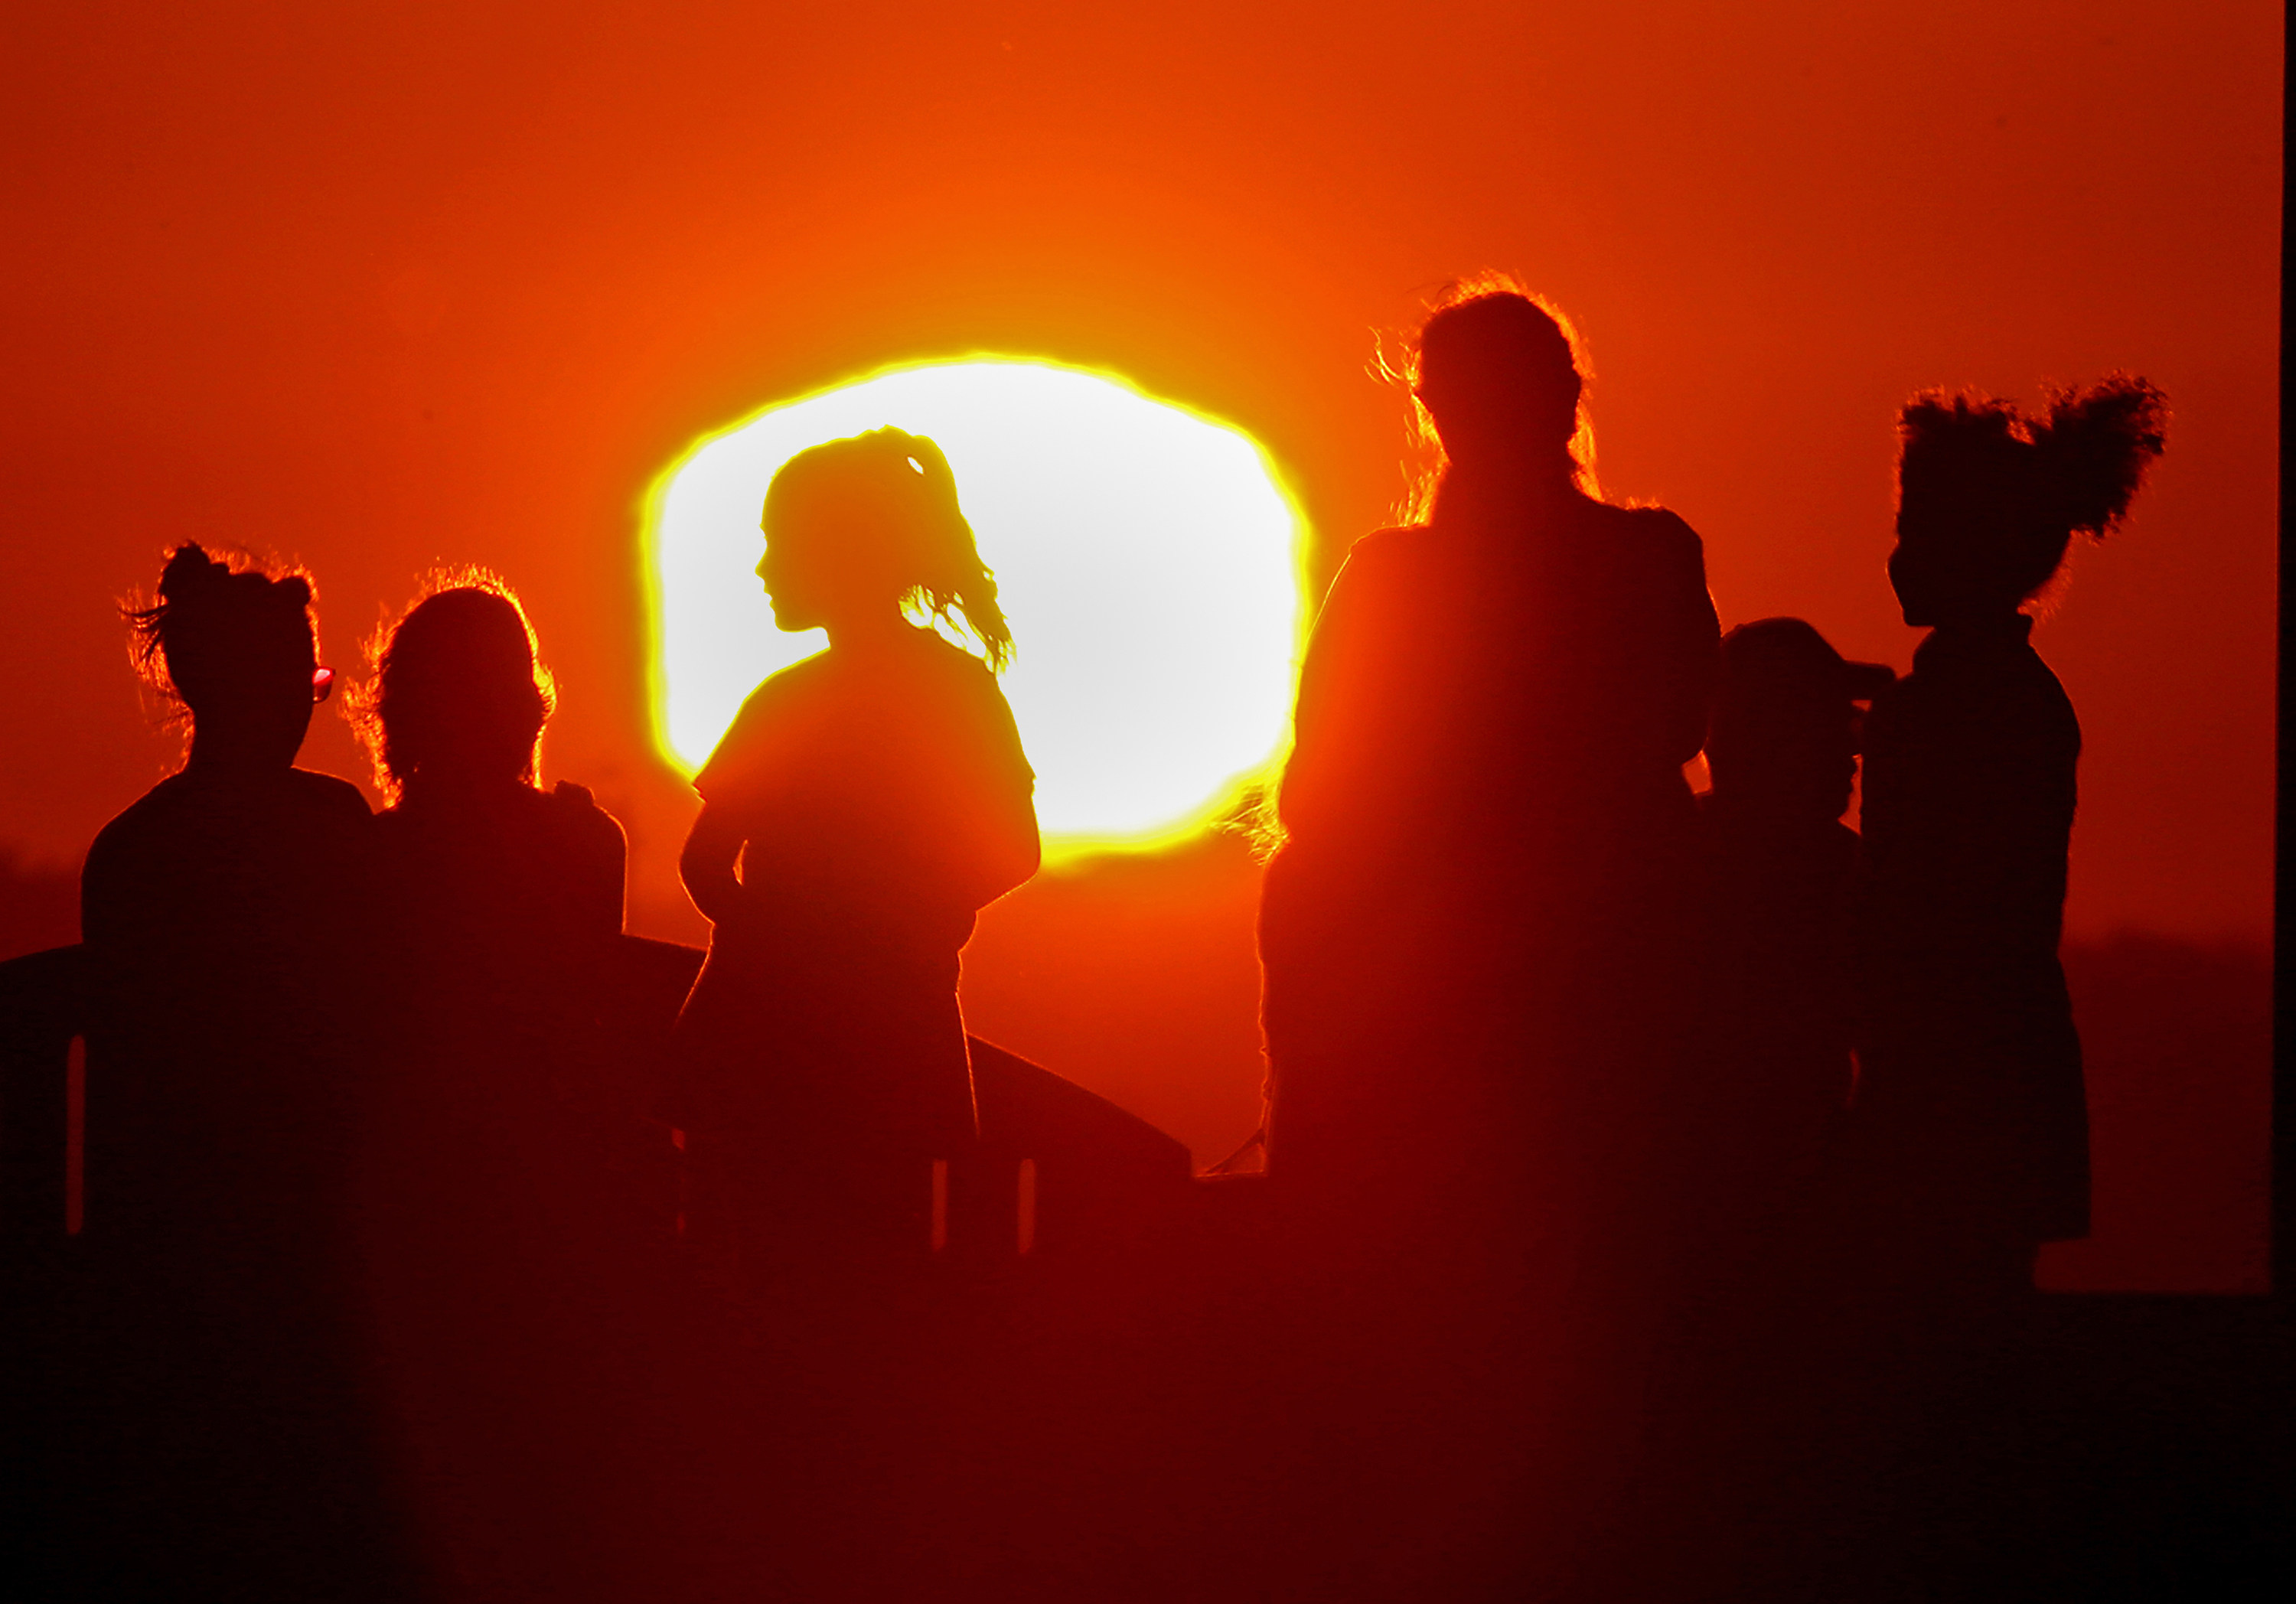 For every 0.1 degree Celsius of warming above present levels, about 140 million more people will be exposed to dangerous heat, according to a study. Photo: Los Angeles Times/TNS